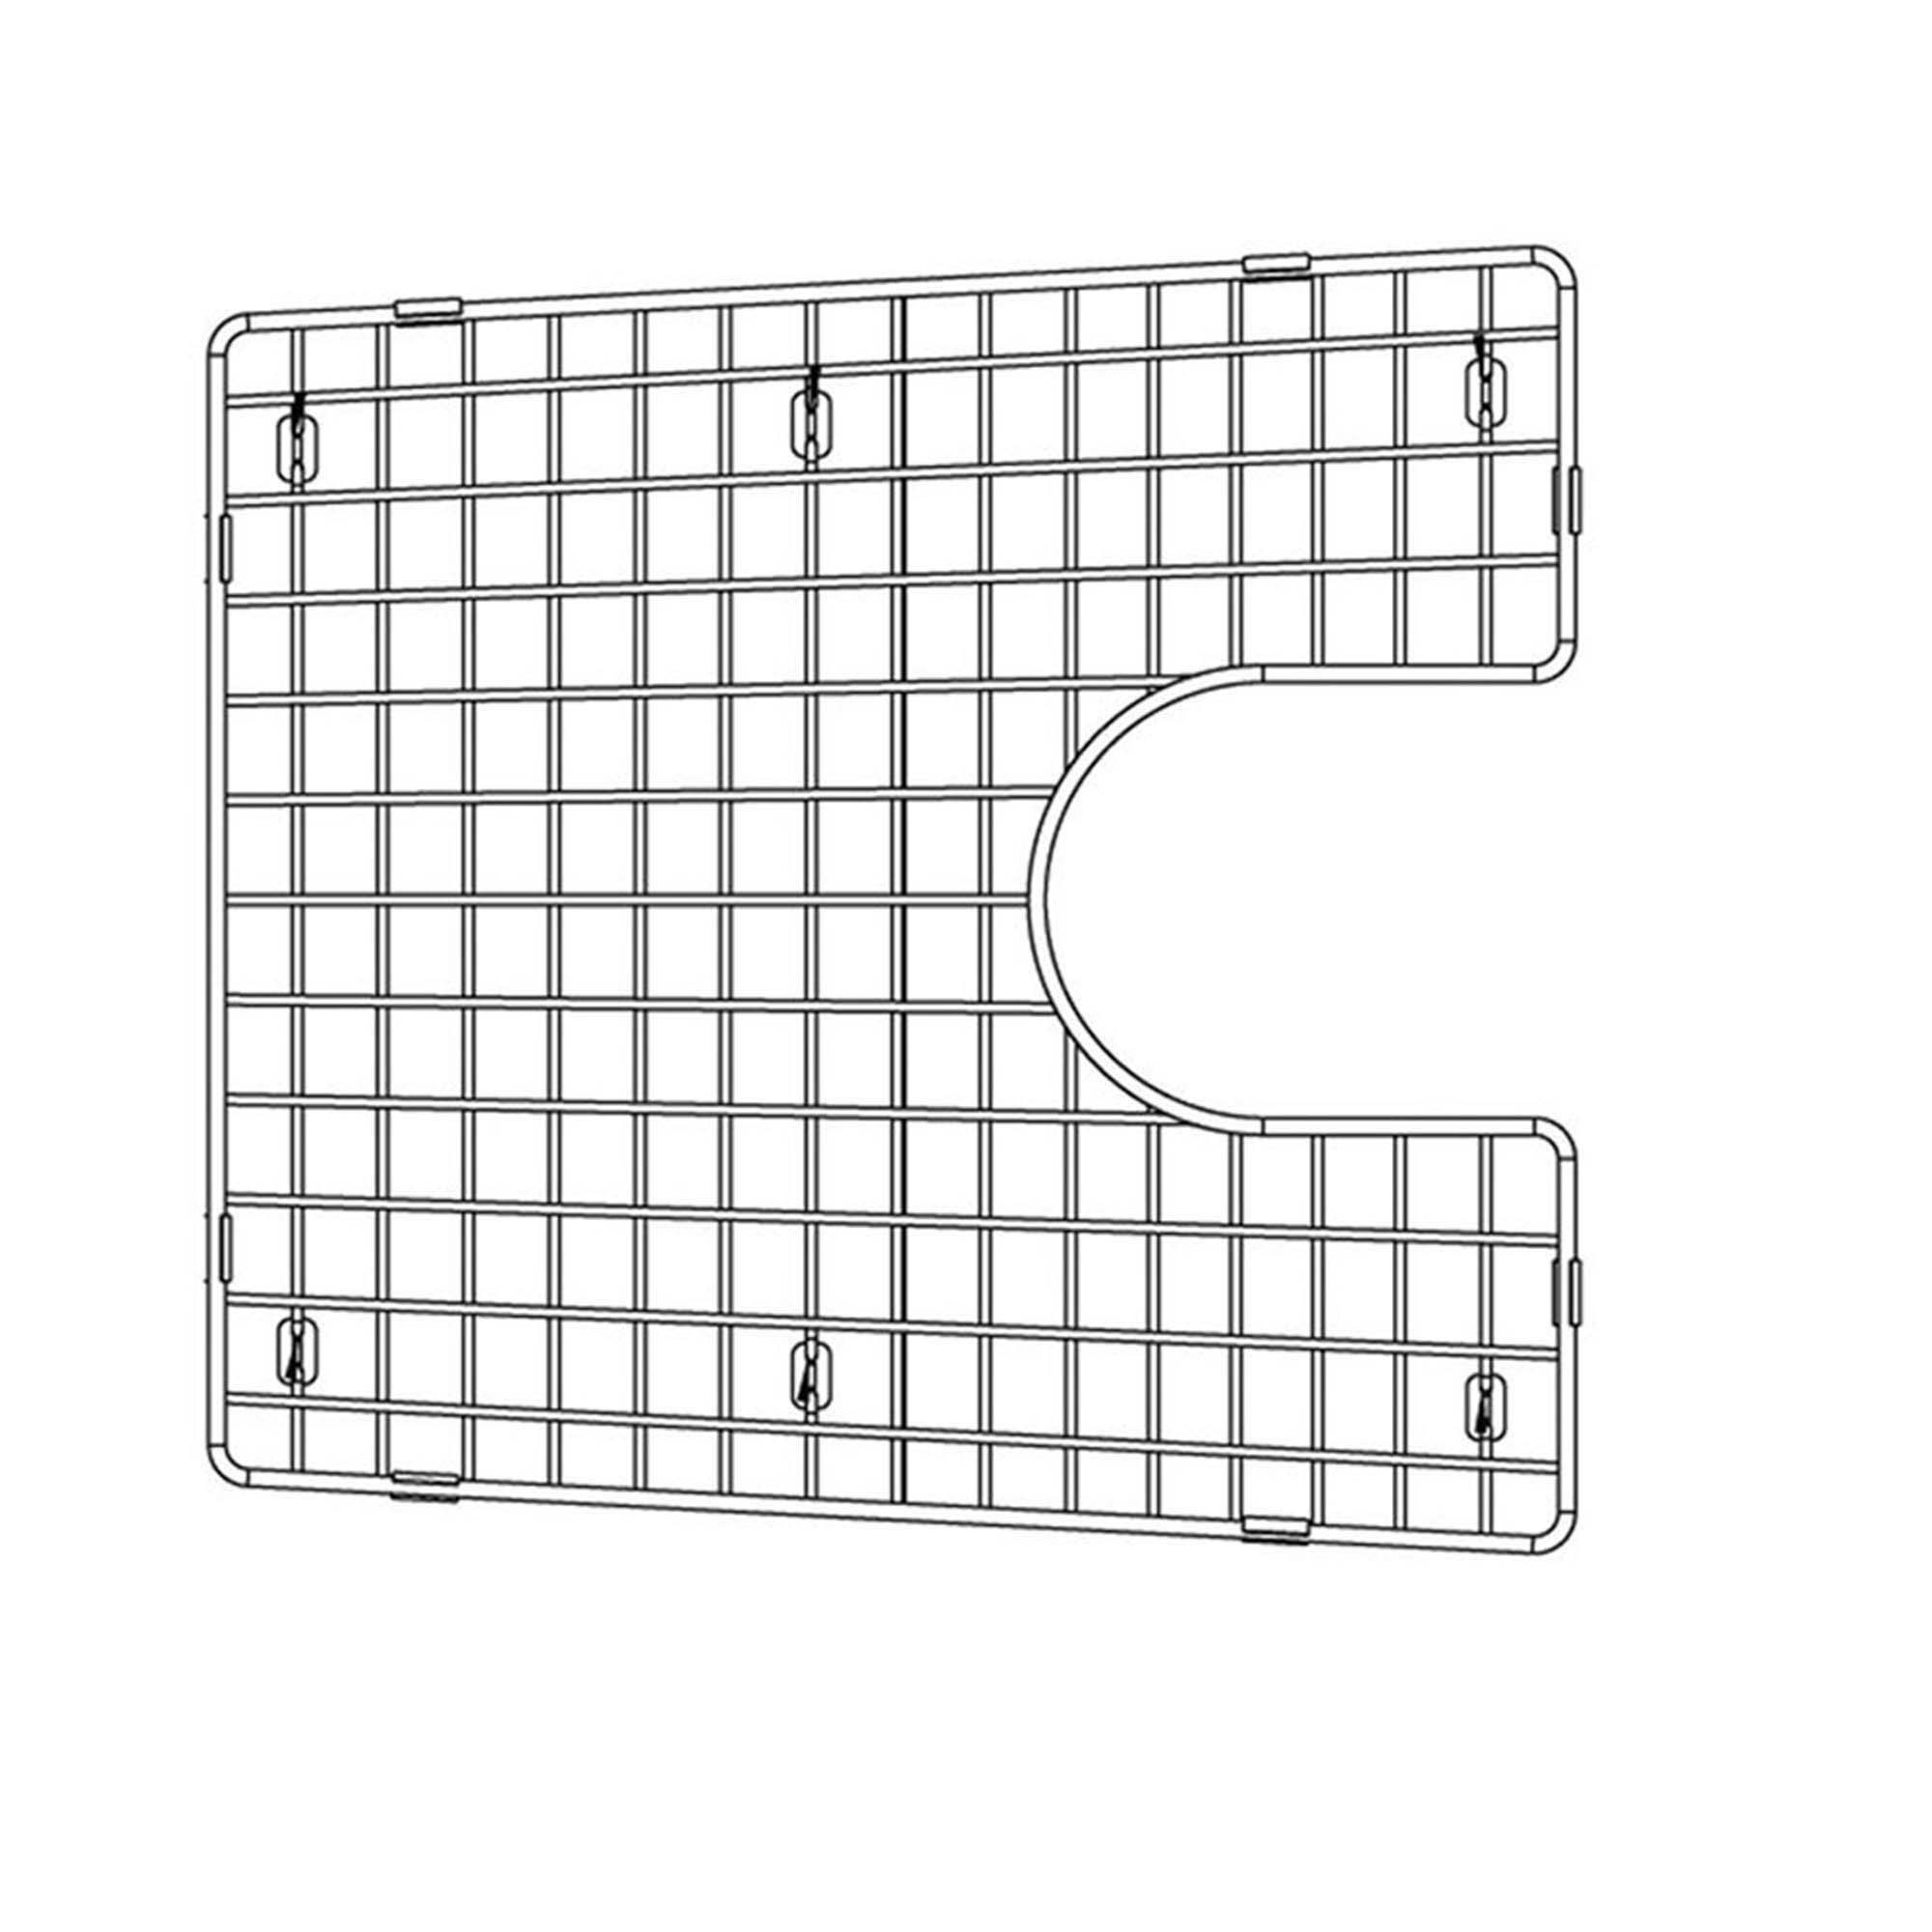 Blanco 226828 Performa Stainless Steel Kitchen Grid Sink Protector, Chrome - image 1 of 2